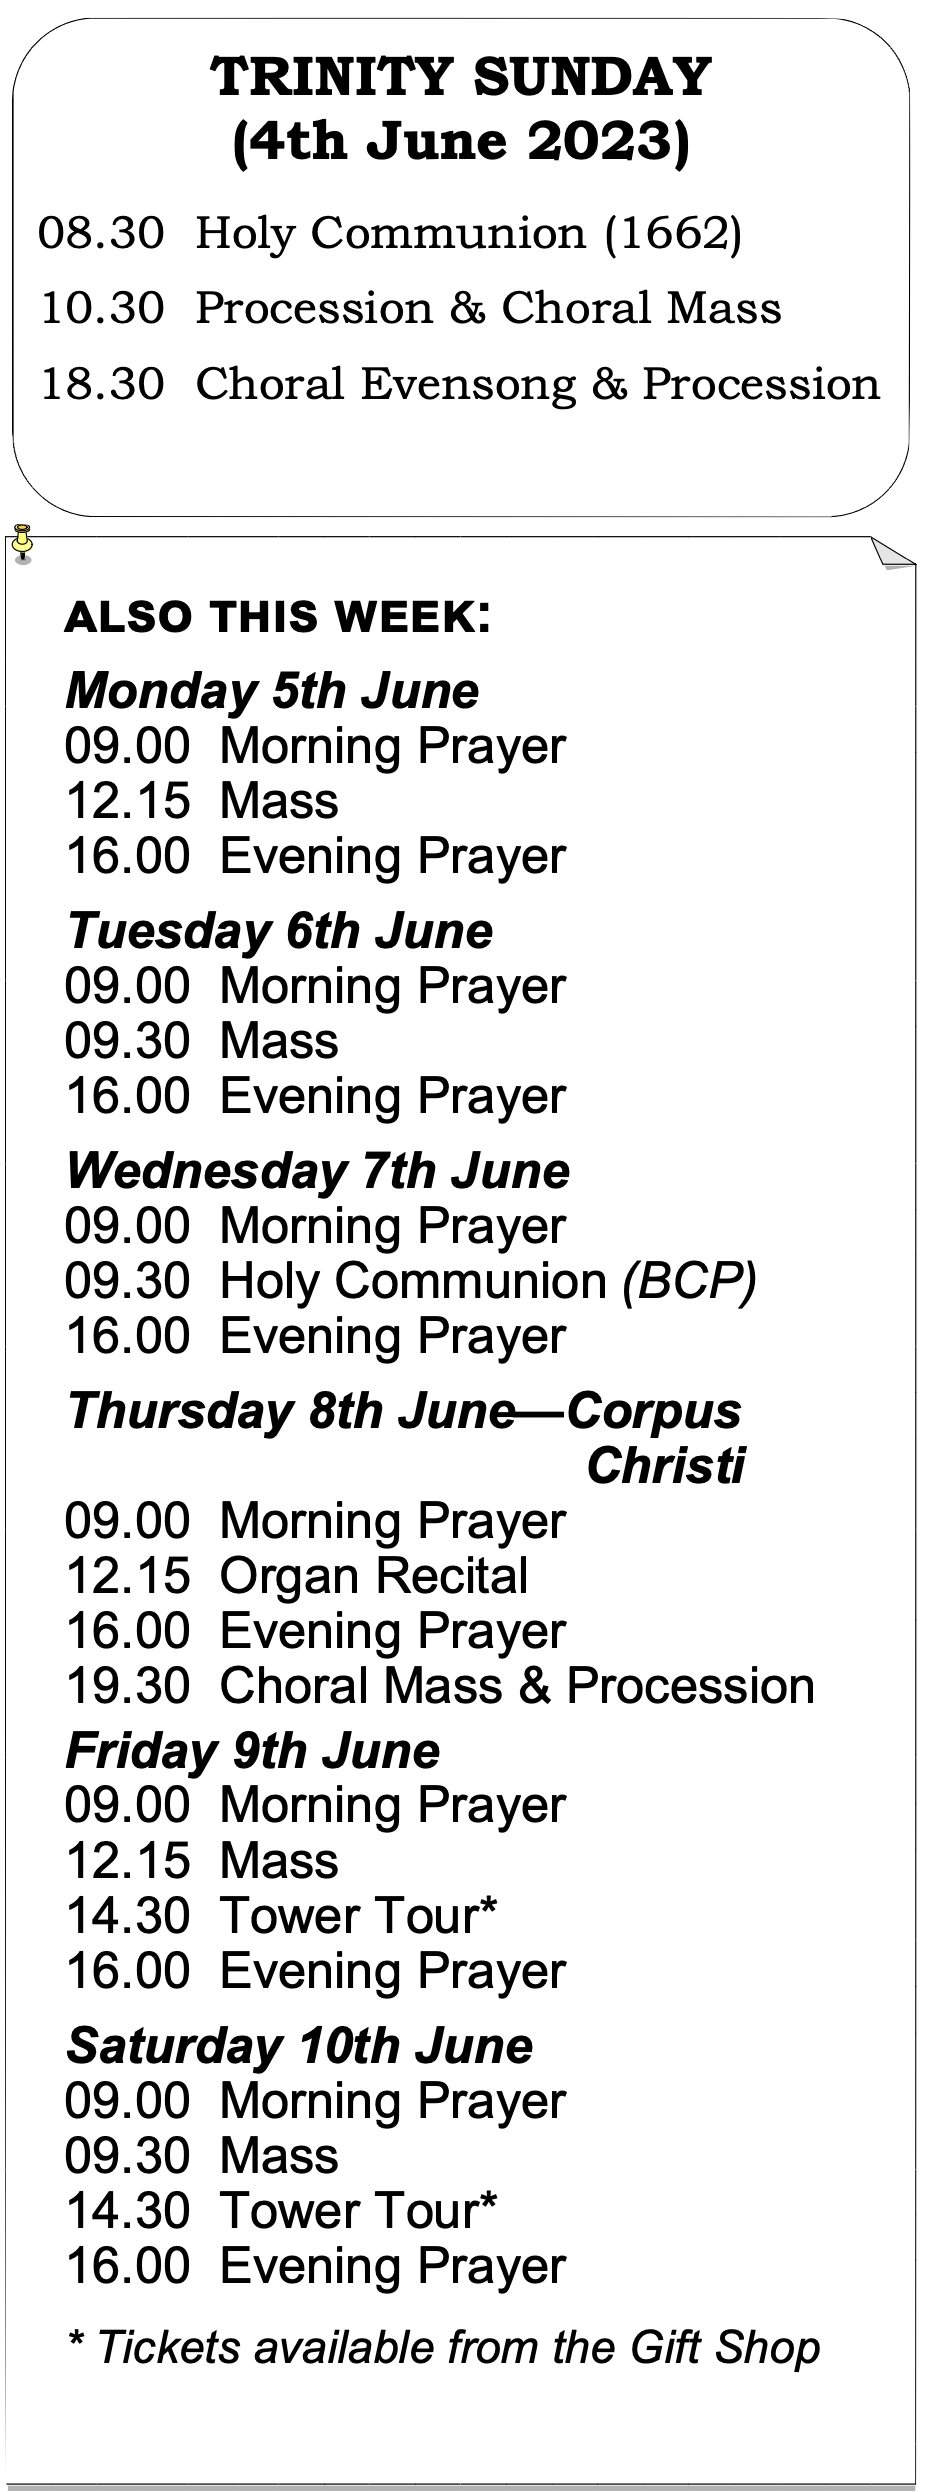 Services for Palm Sunday and Lent Week 6